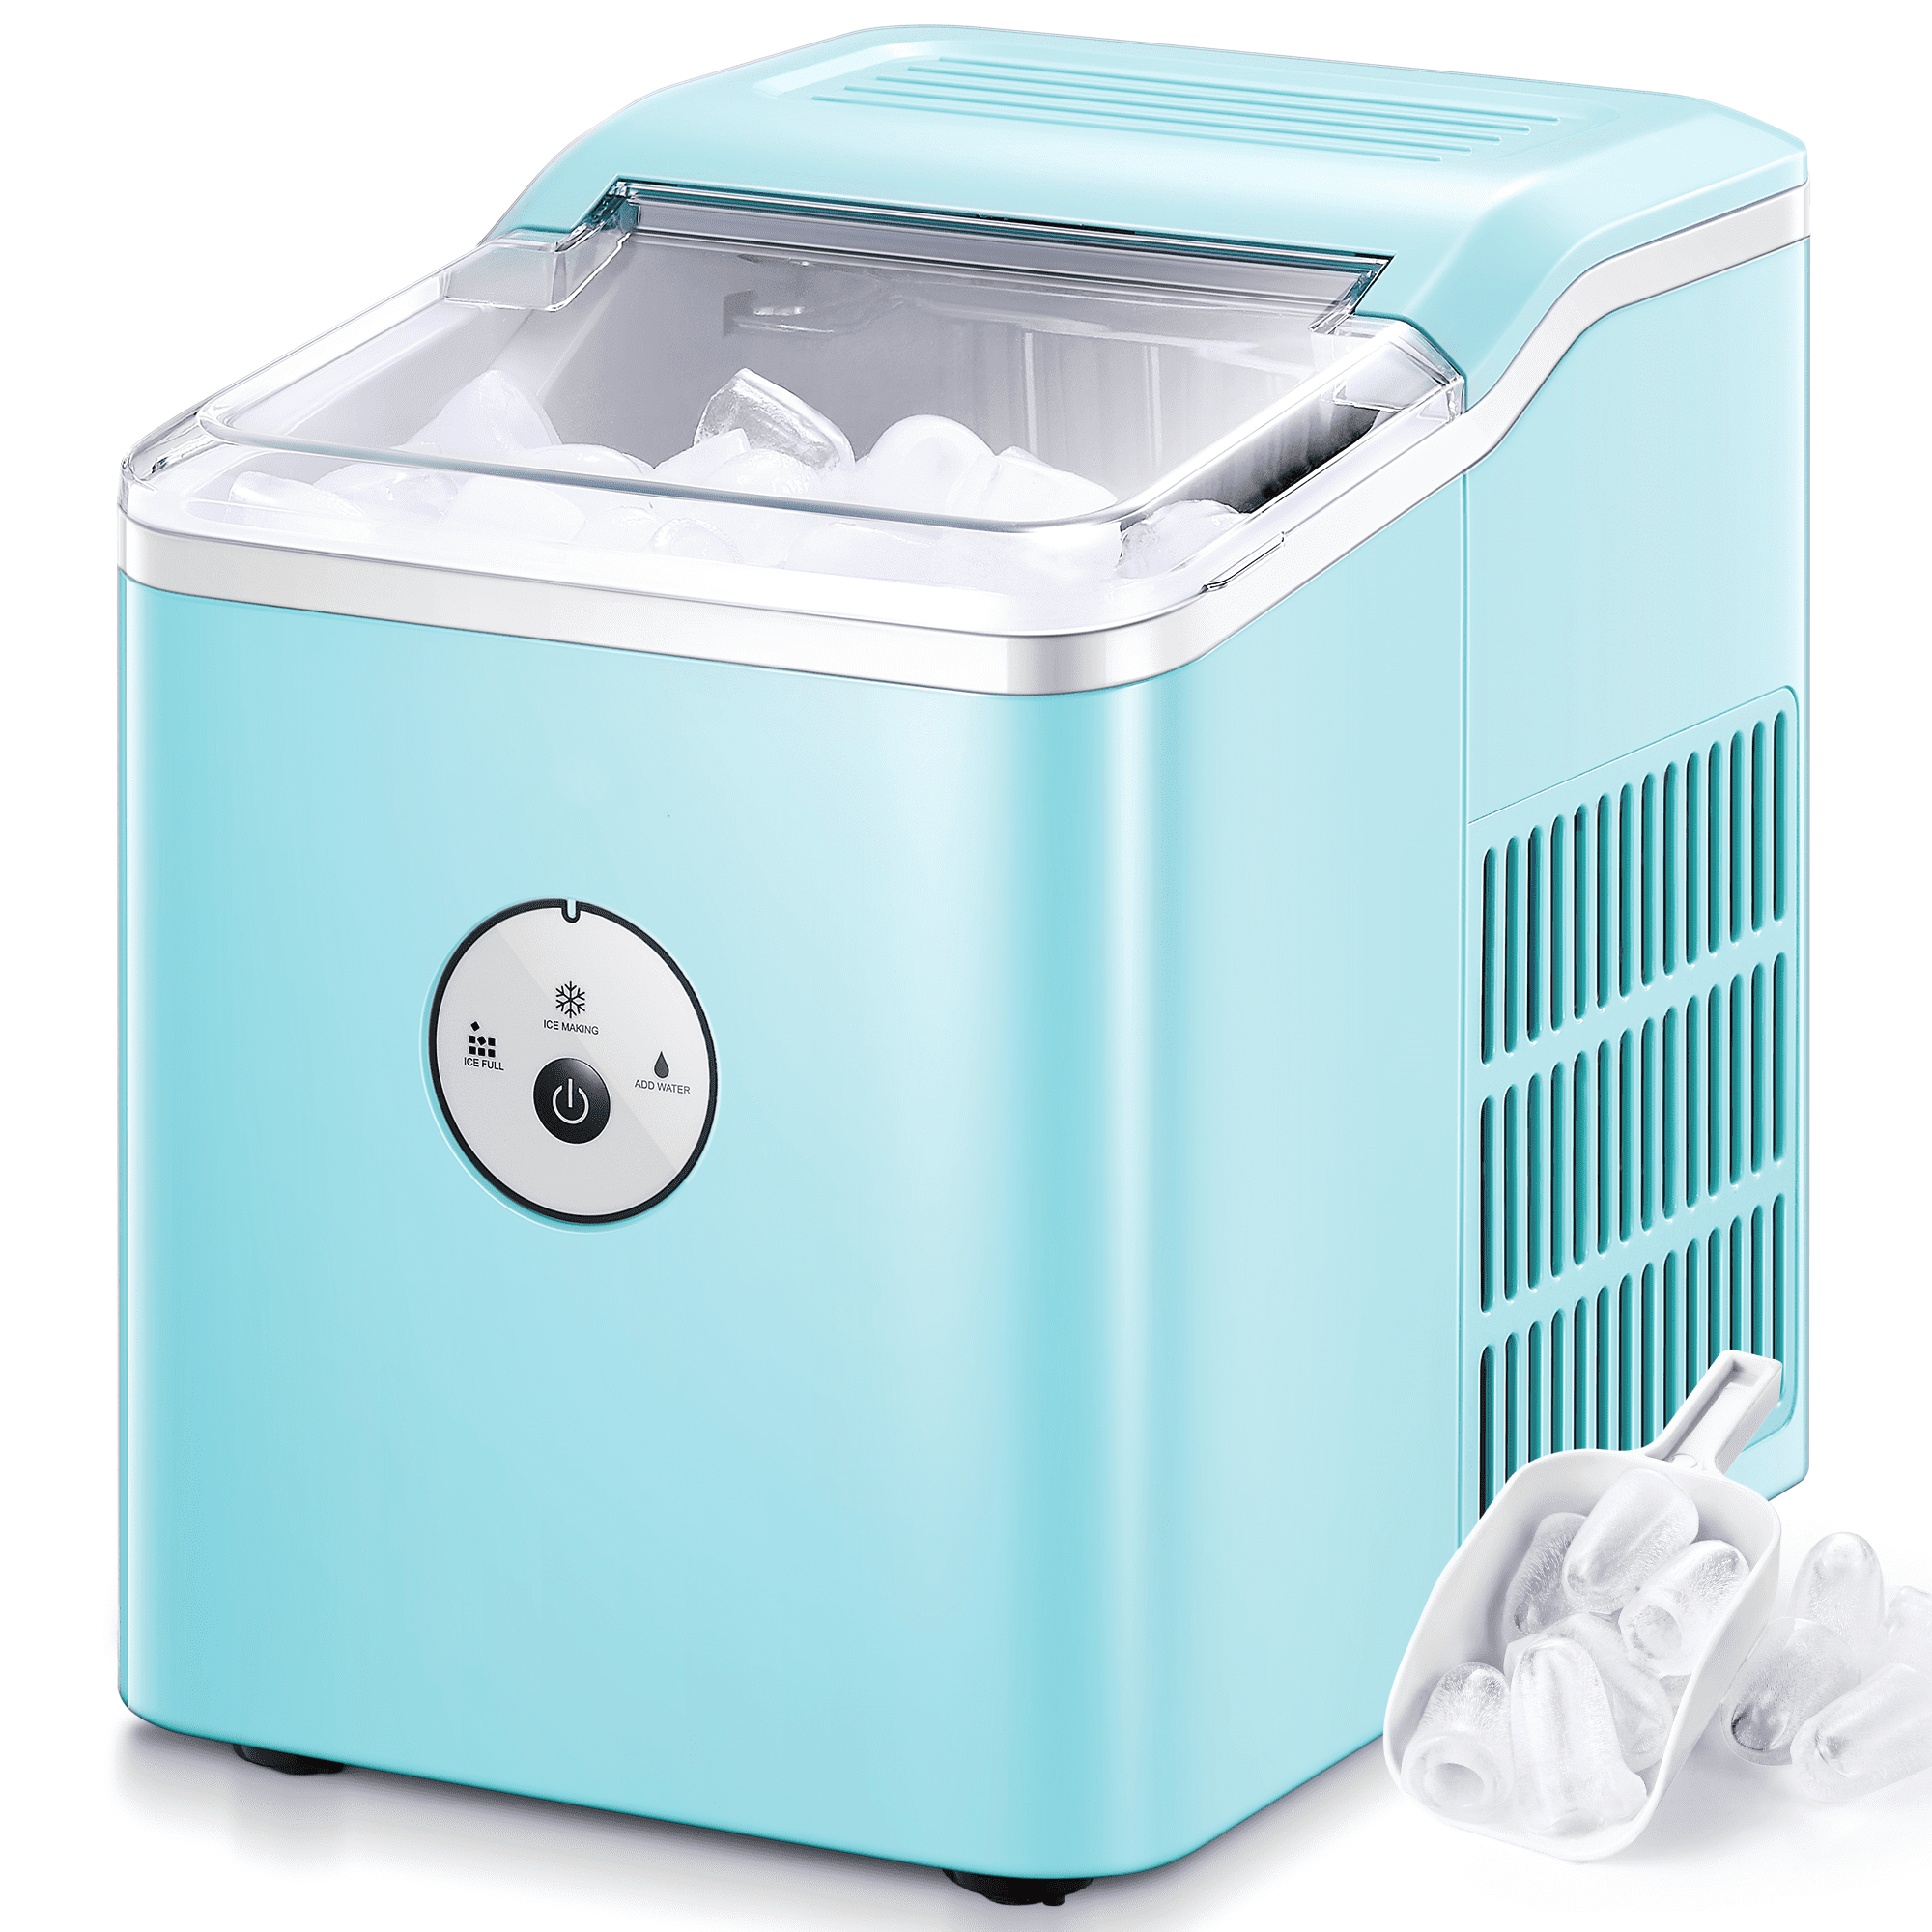 Top 10 Reasons to Buy a Counter Top Ice Maker - Ice Maker Marketplace